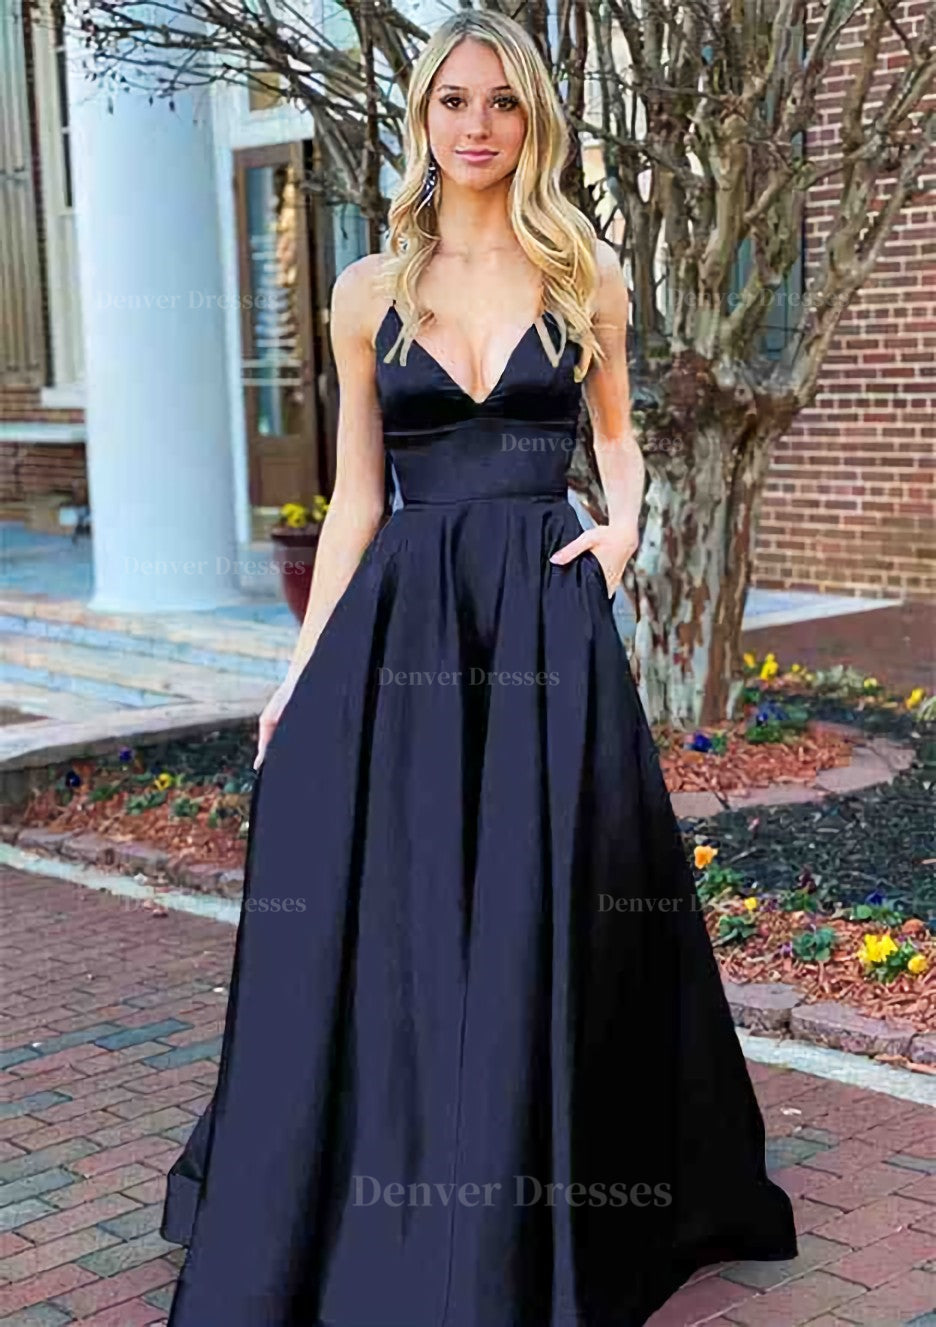 Bridal Shoes, A-line V Neck Sleeveless Charmeuse Long/Floor-Length Prom Dress With Pockets